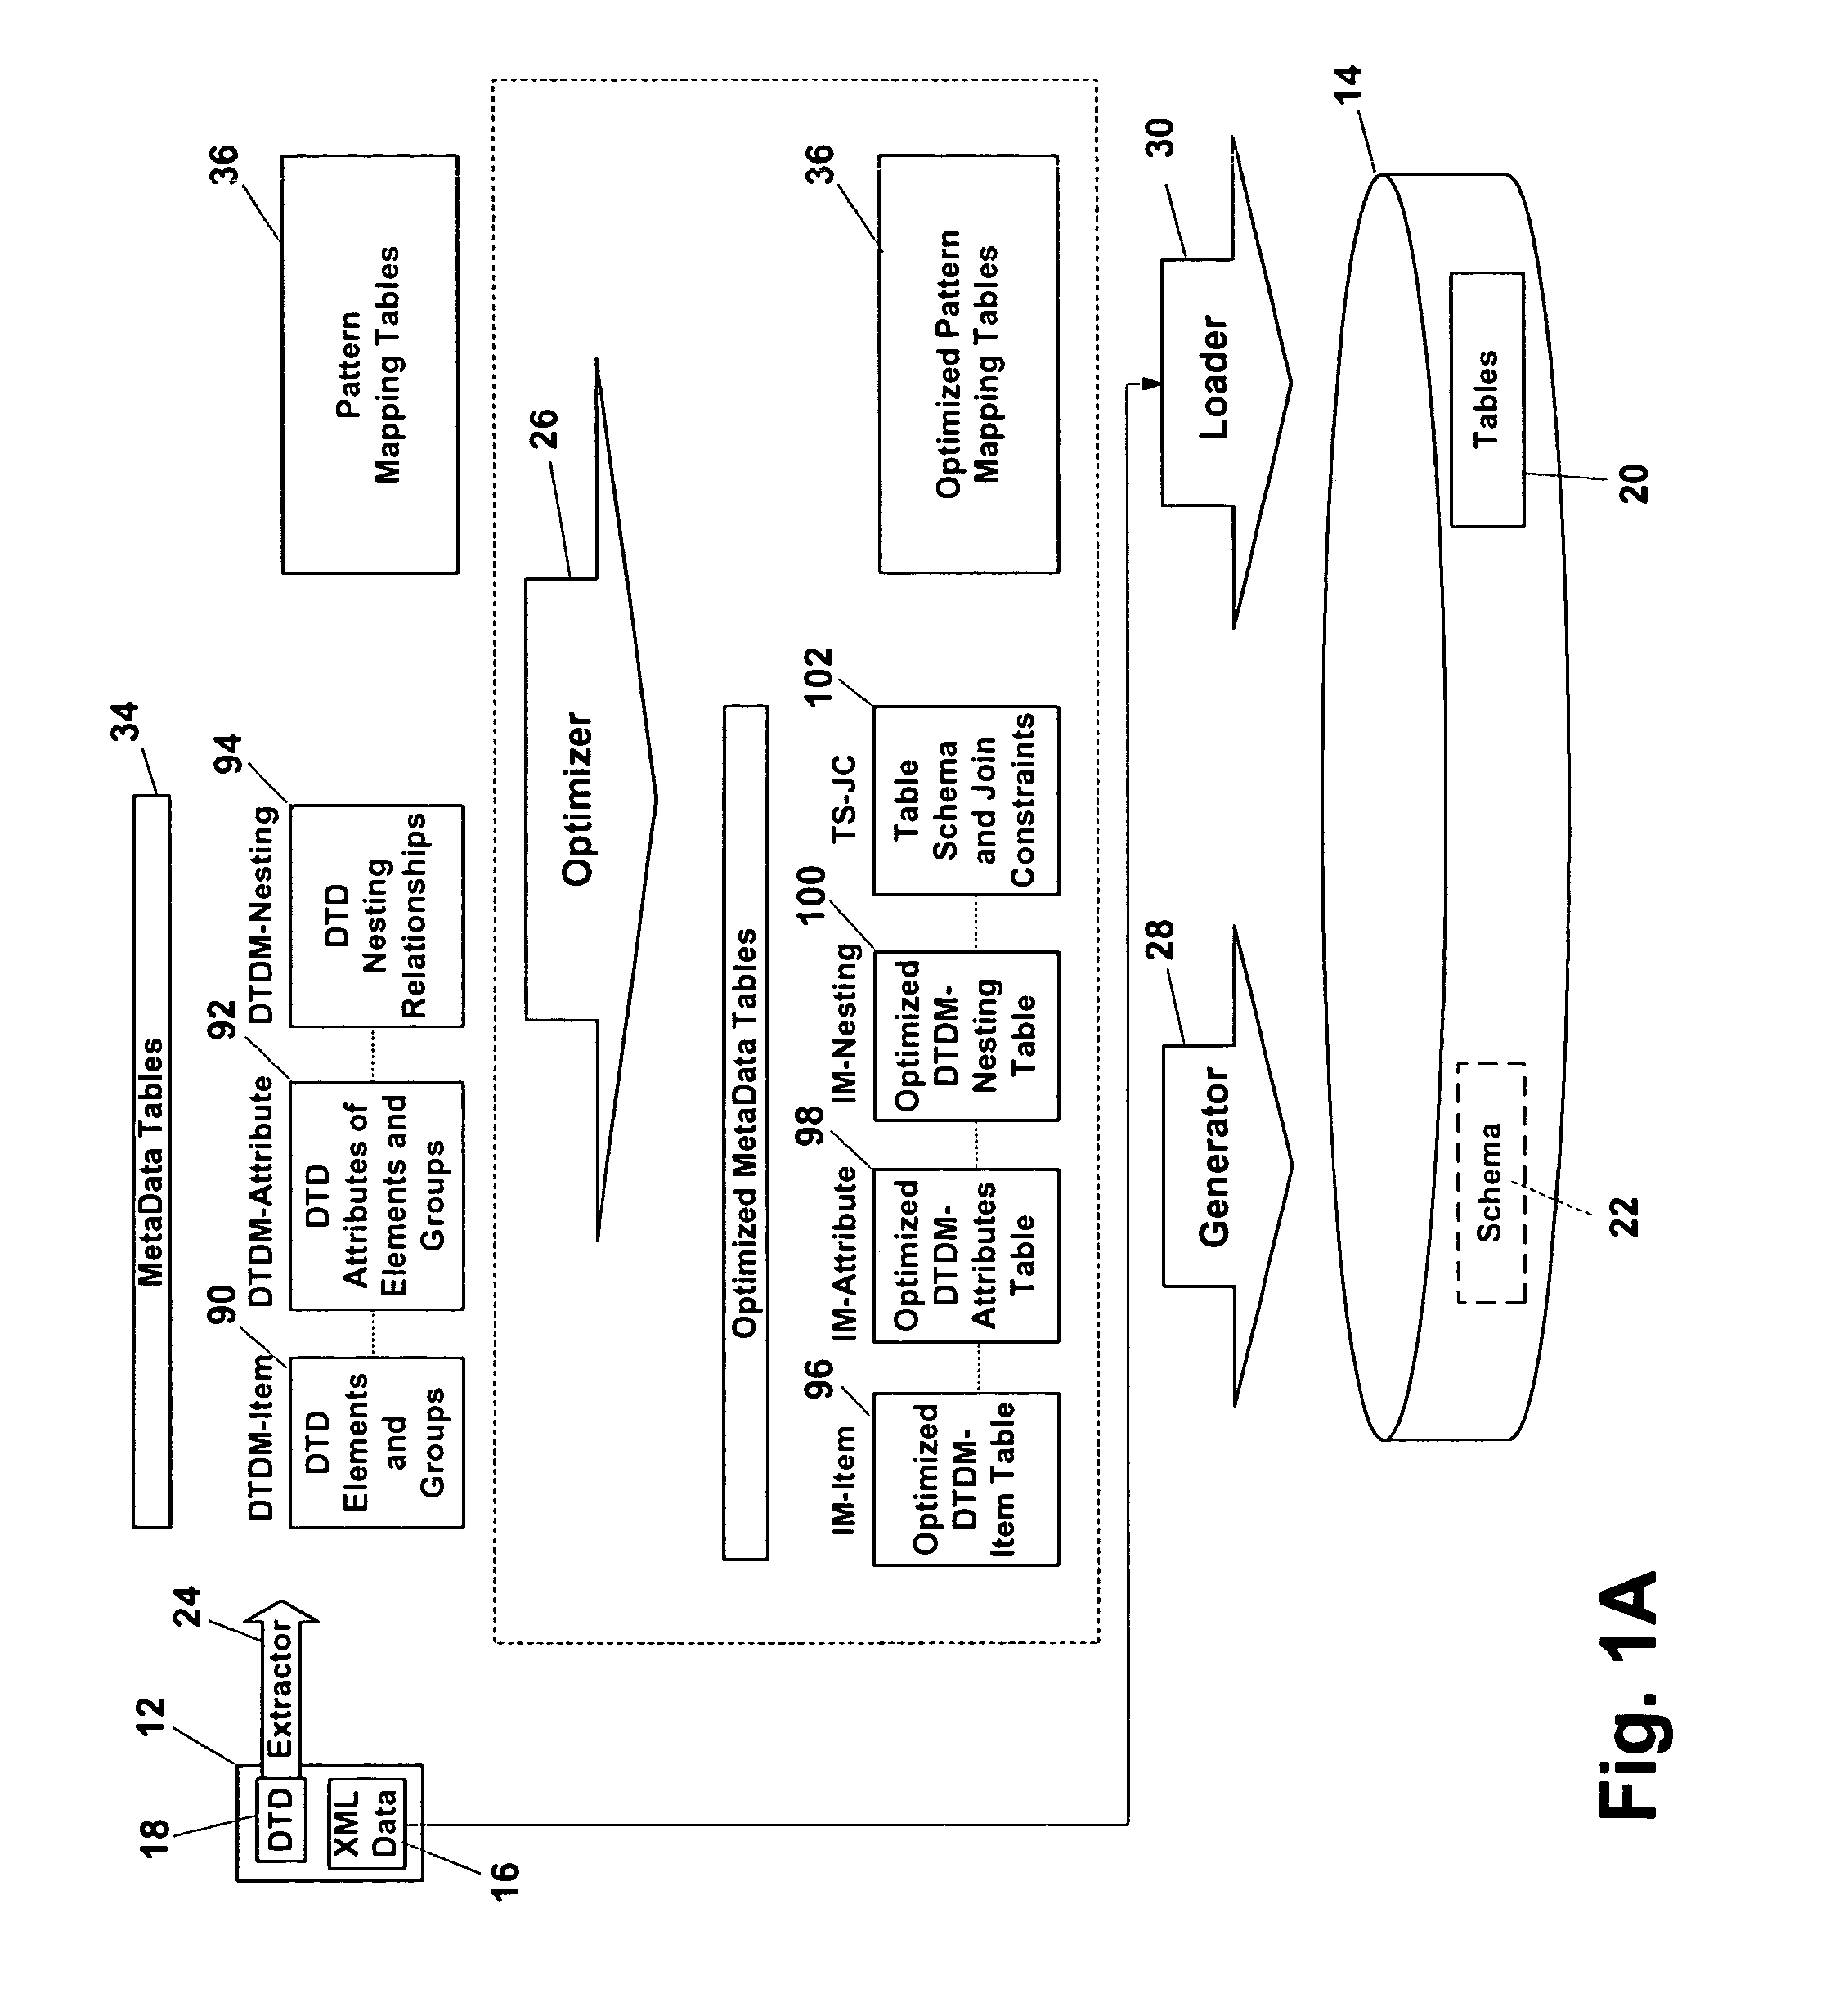 System and method for automatic loading of an XML document defined by a document-type definition into a relational database including the generation of a relational schema therefor